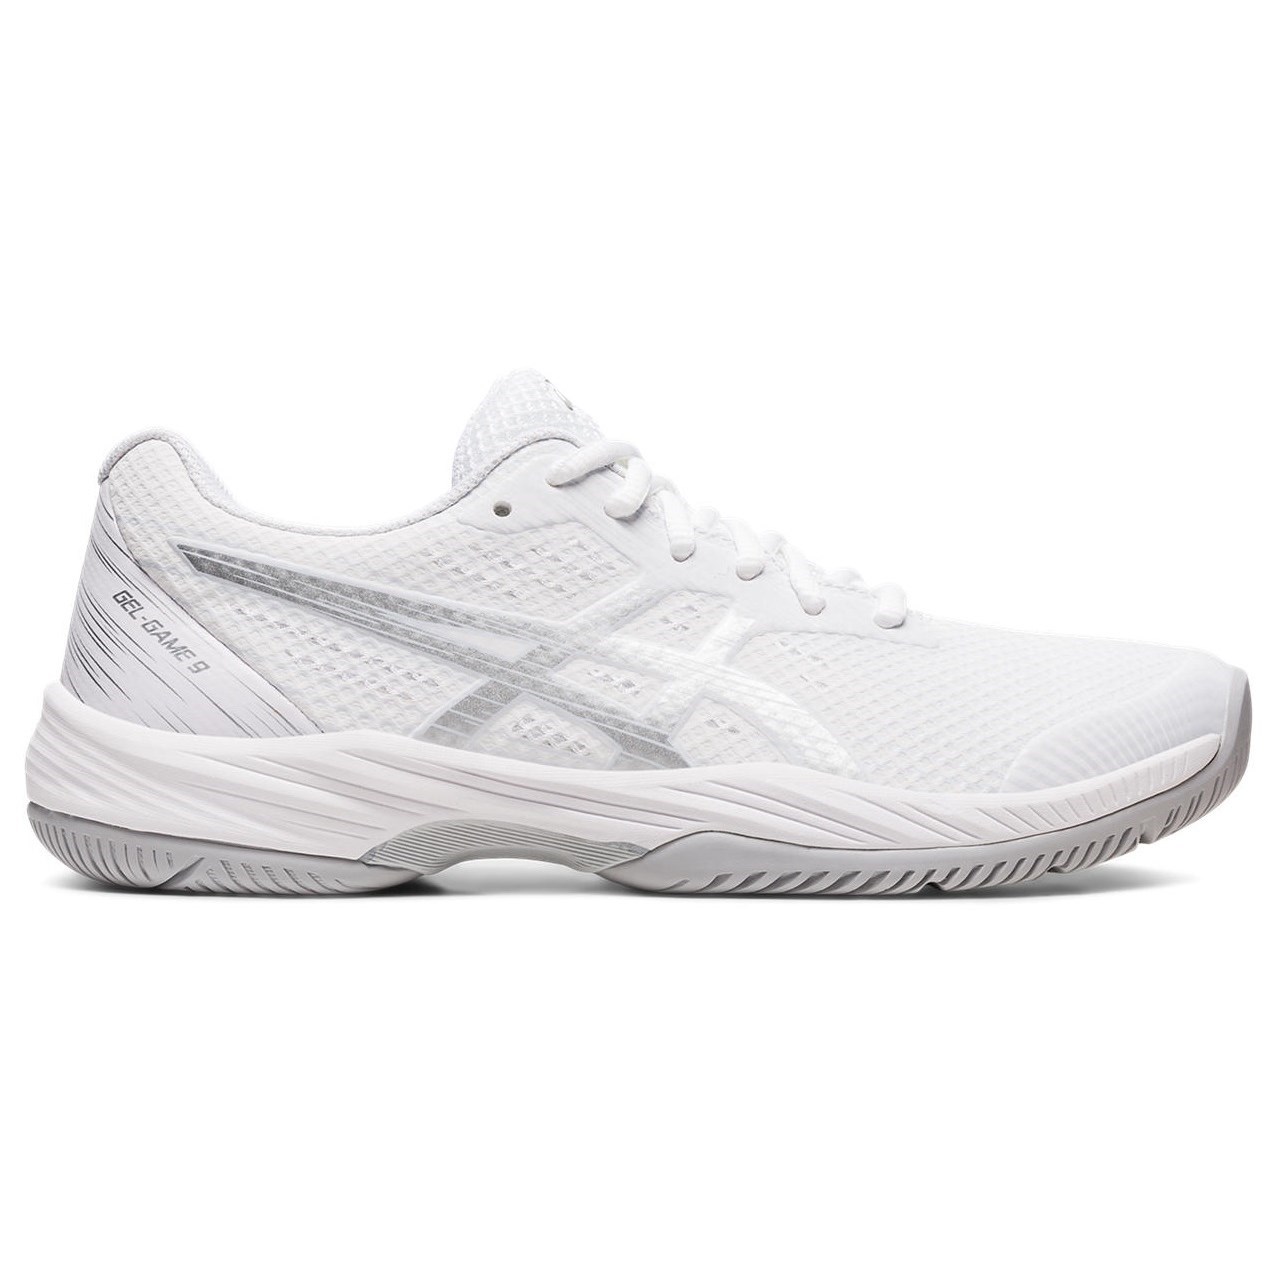 Asics Gel Game 9 - Womens Netball Shoes - White/Pure Silver | Sportitude